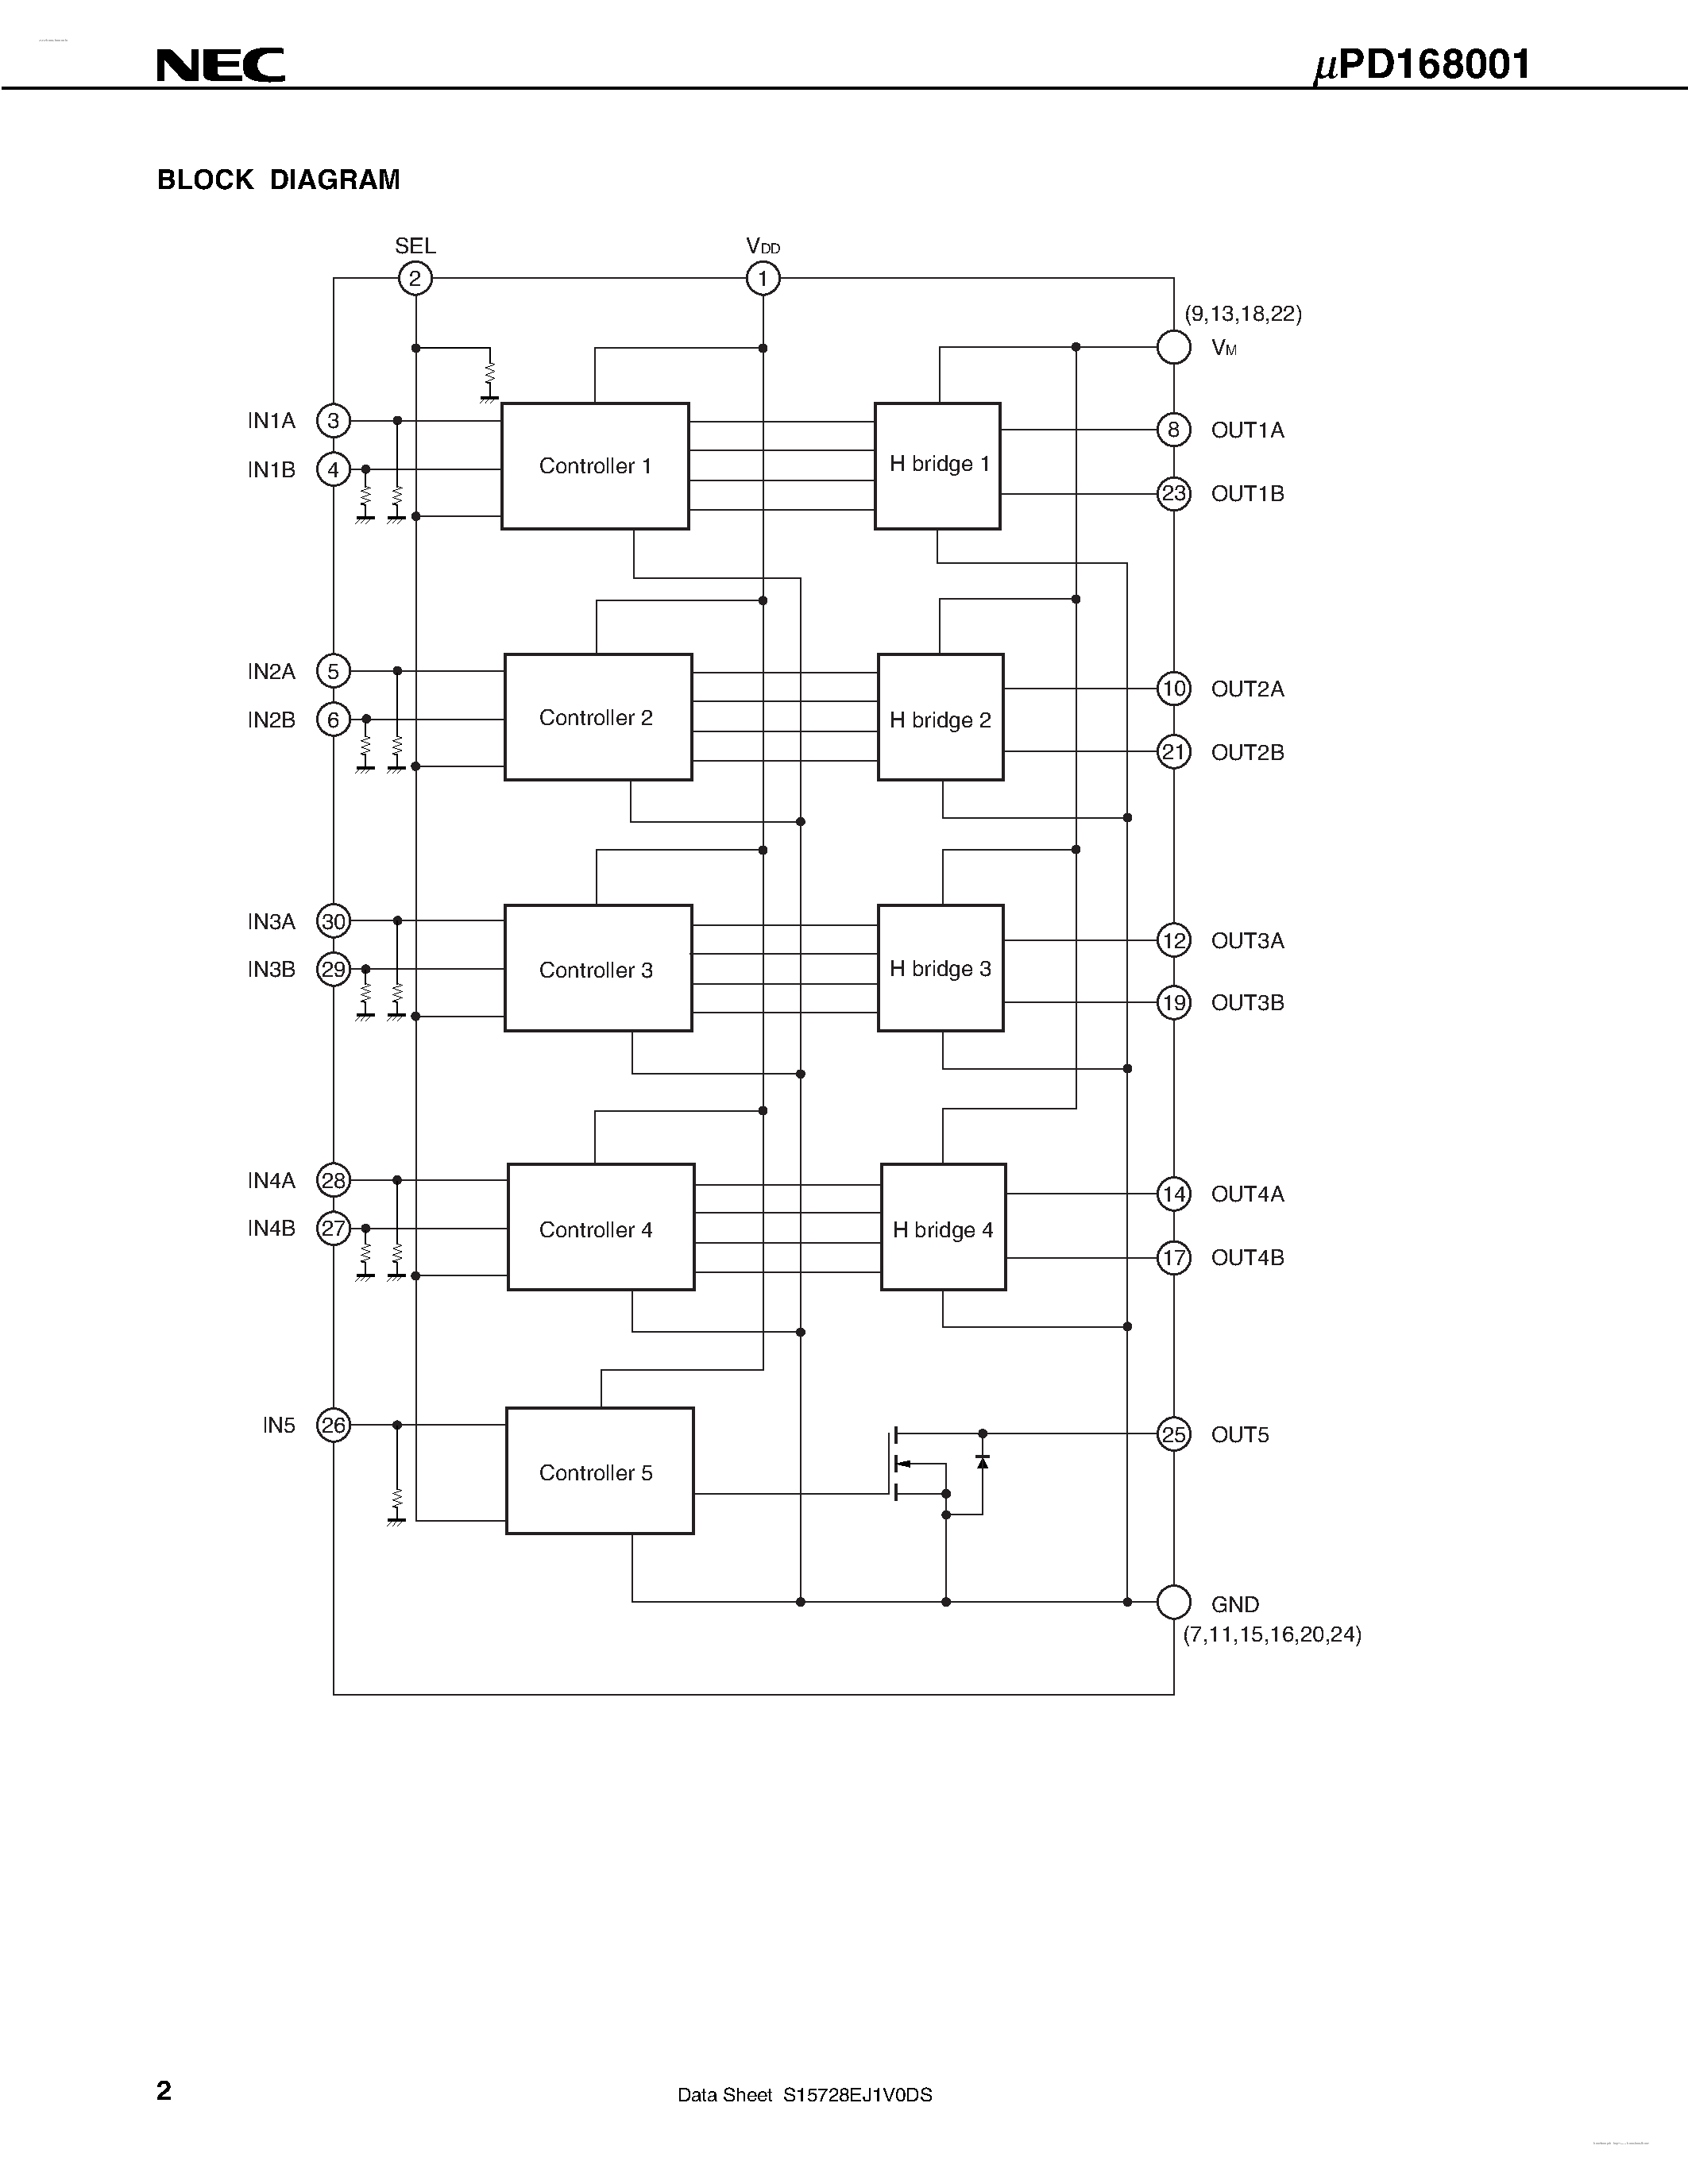 Datasheet UPD168001 - MONOLITHIC 4-CHANNEL H BRIDGE LOW-SIDE SWITCH page 2